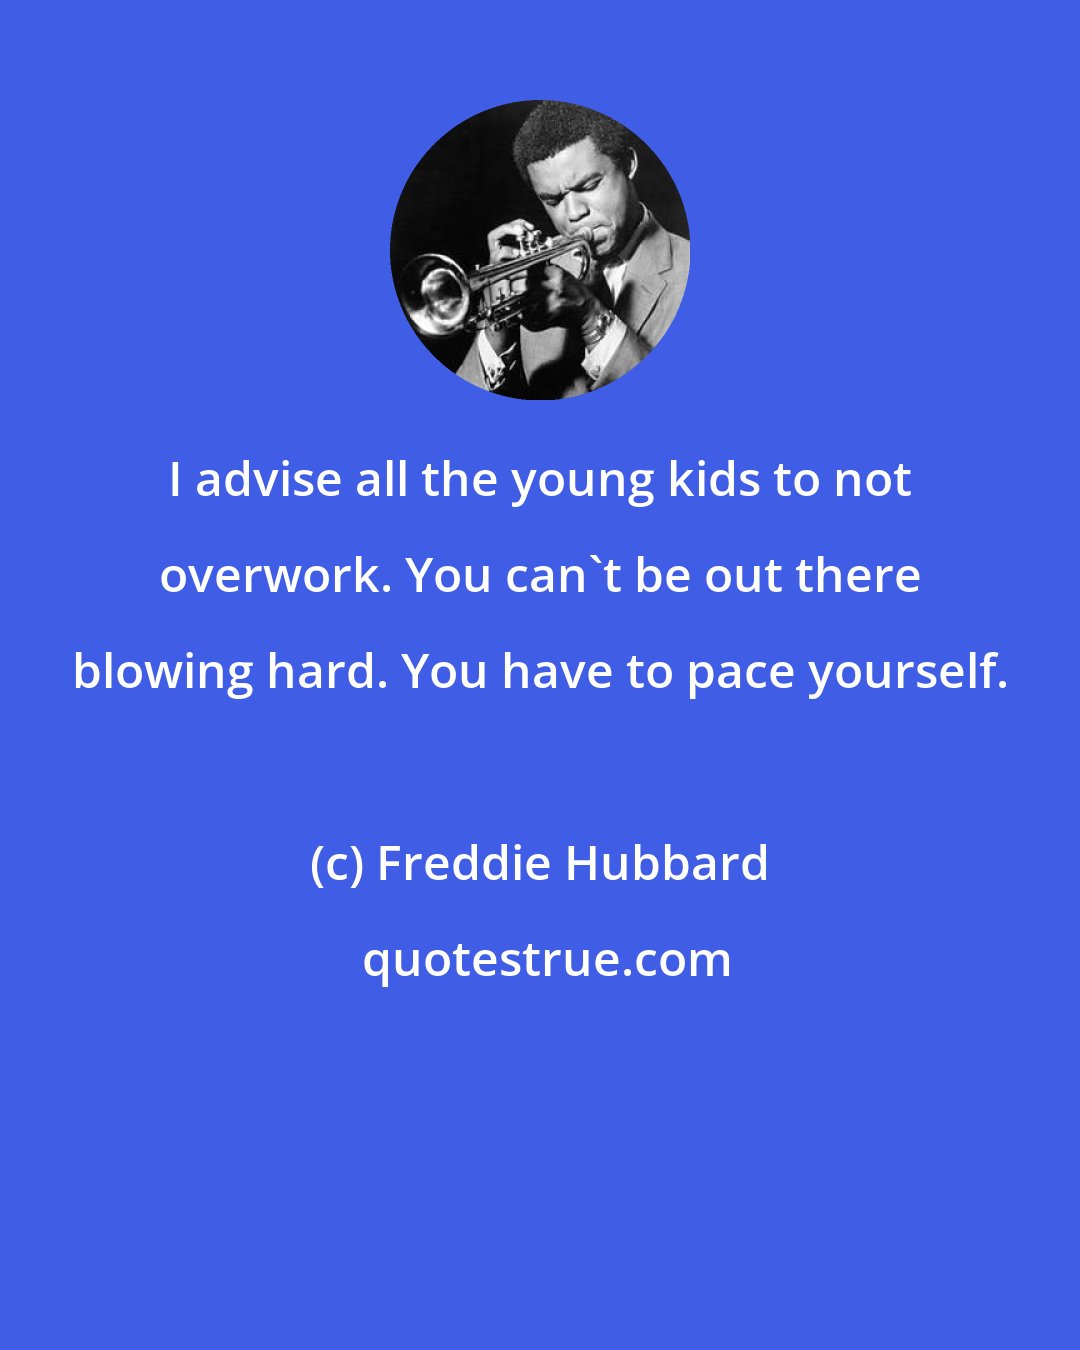 Freddie Hubbard: I advise all the young kids to not overwork. You can't be out there blowing hard. You have to pace yourself.